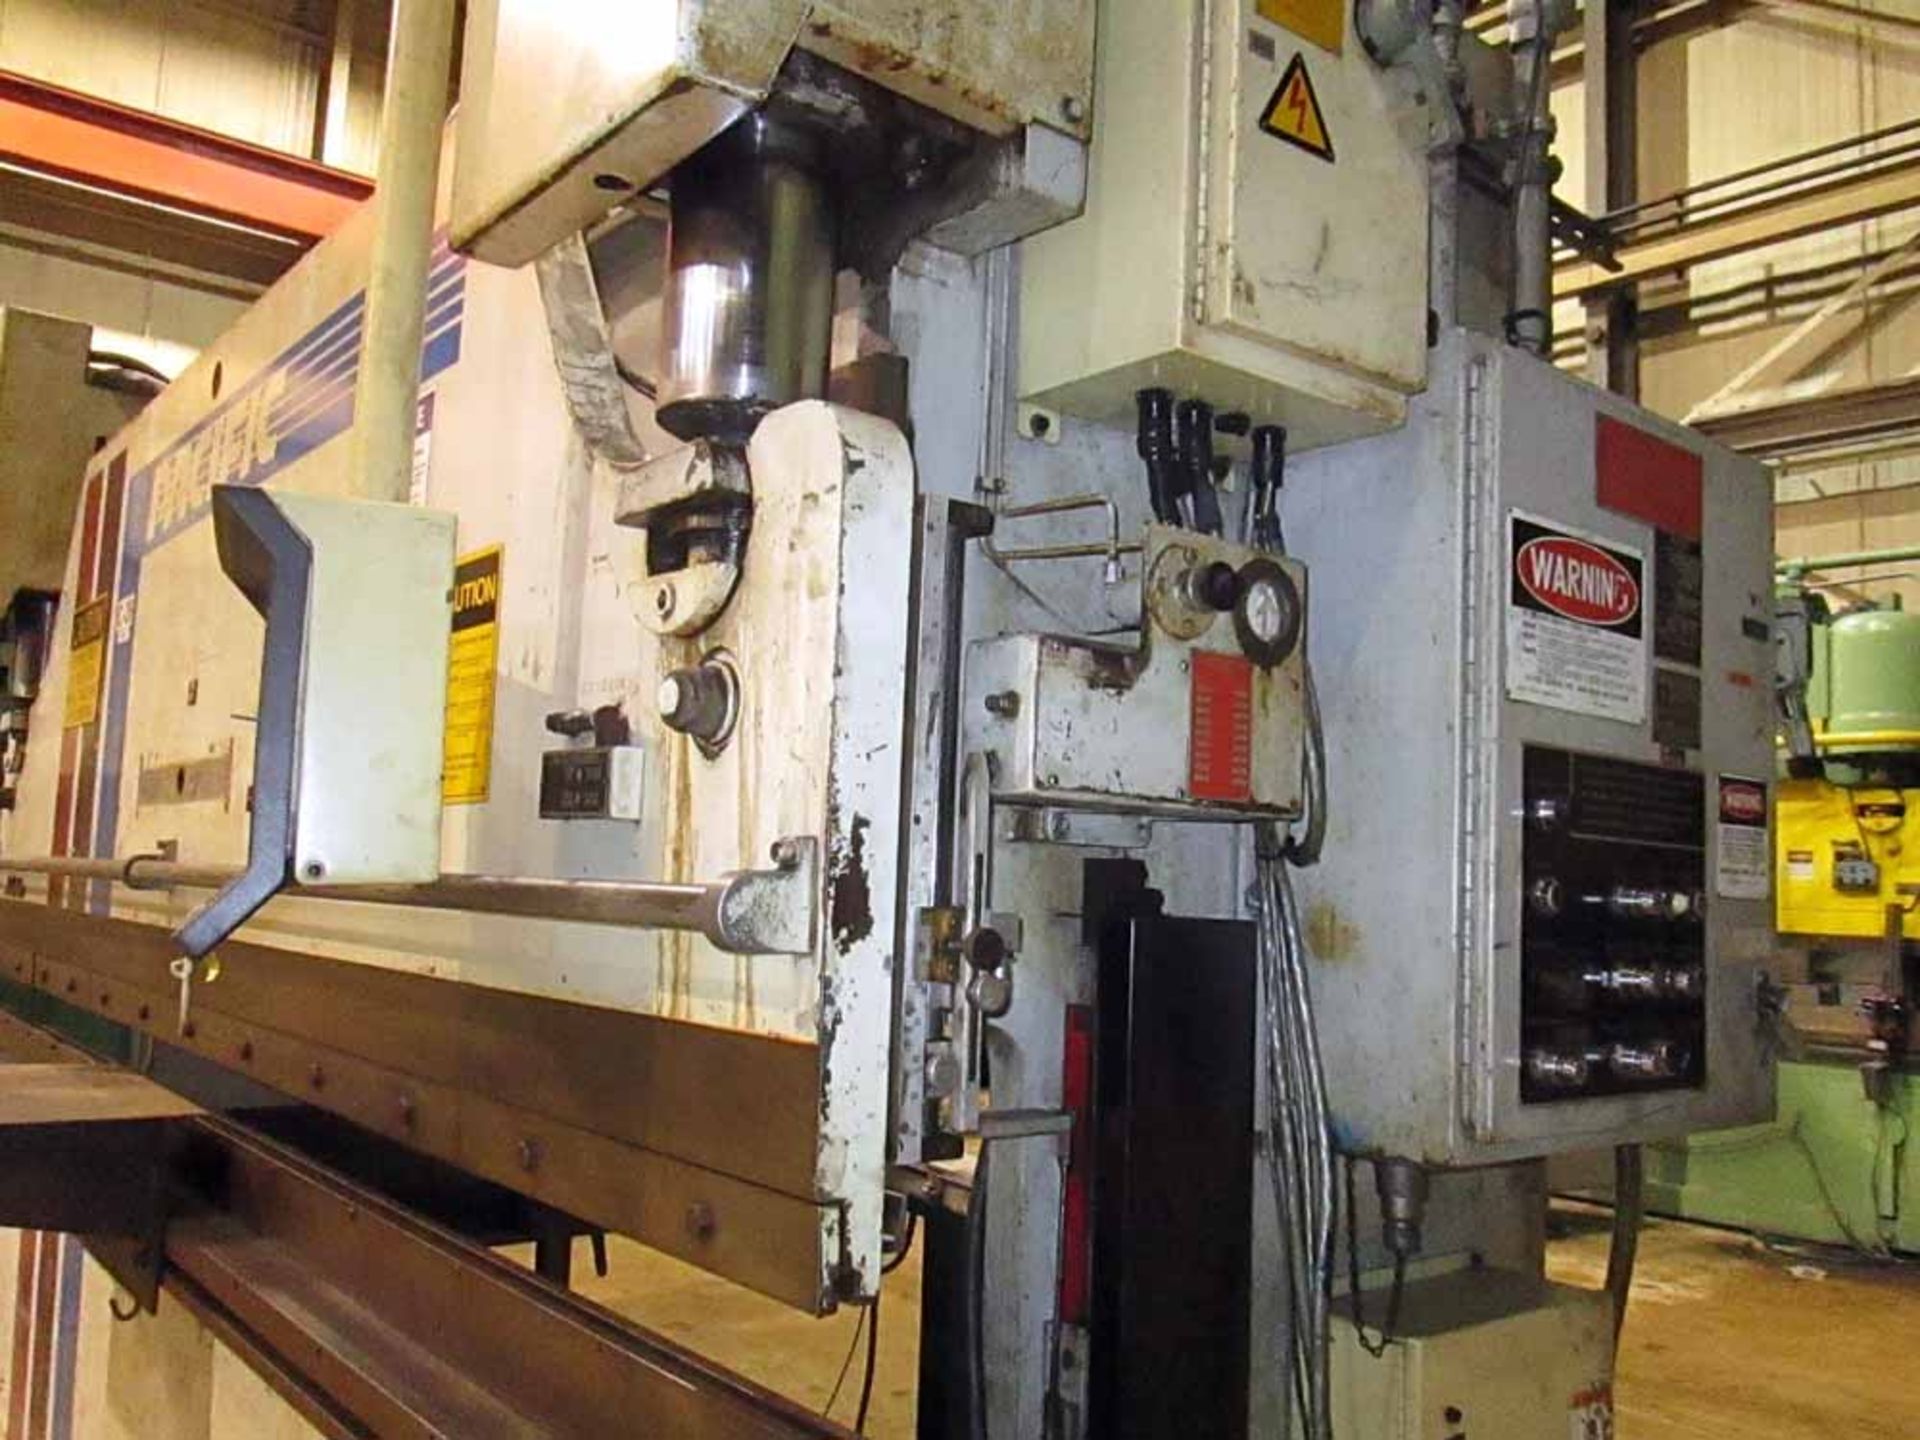 Pacific CNC 2 Axis Hyd. Press Brake, 110-Ton x 12' - Located In Painesville, OH - 6426 - Image 2 of 12